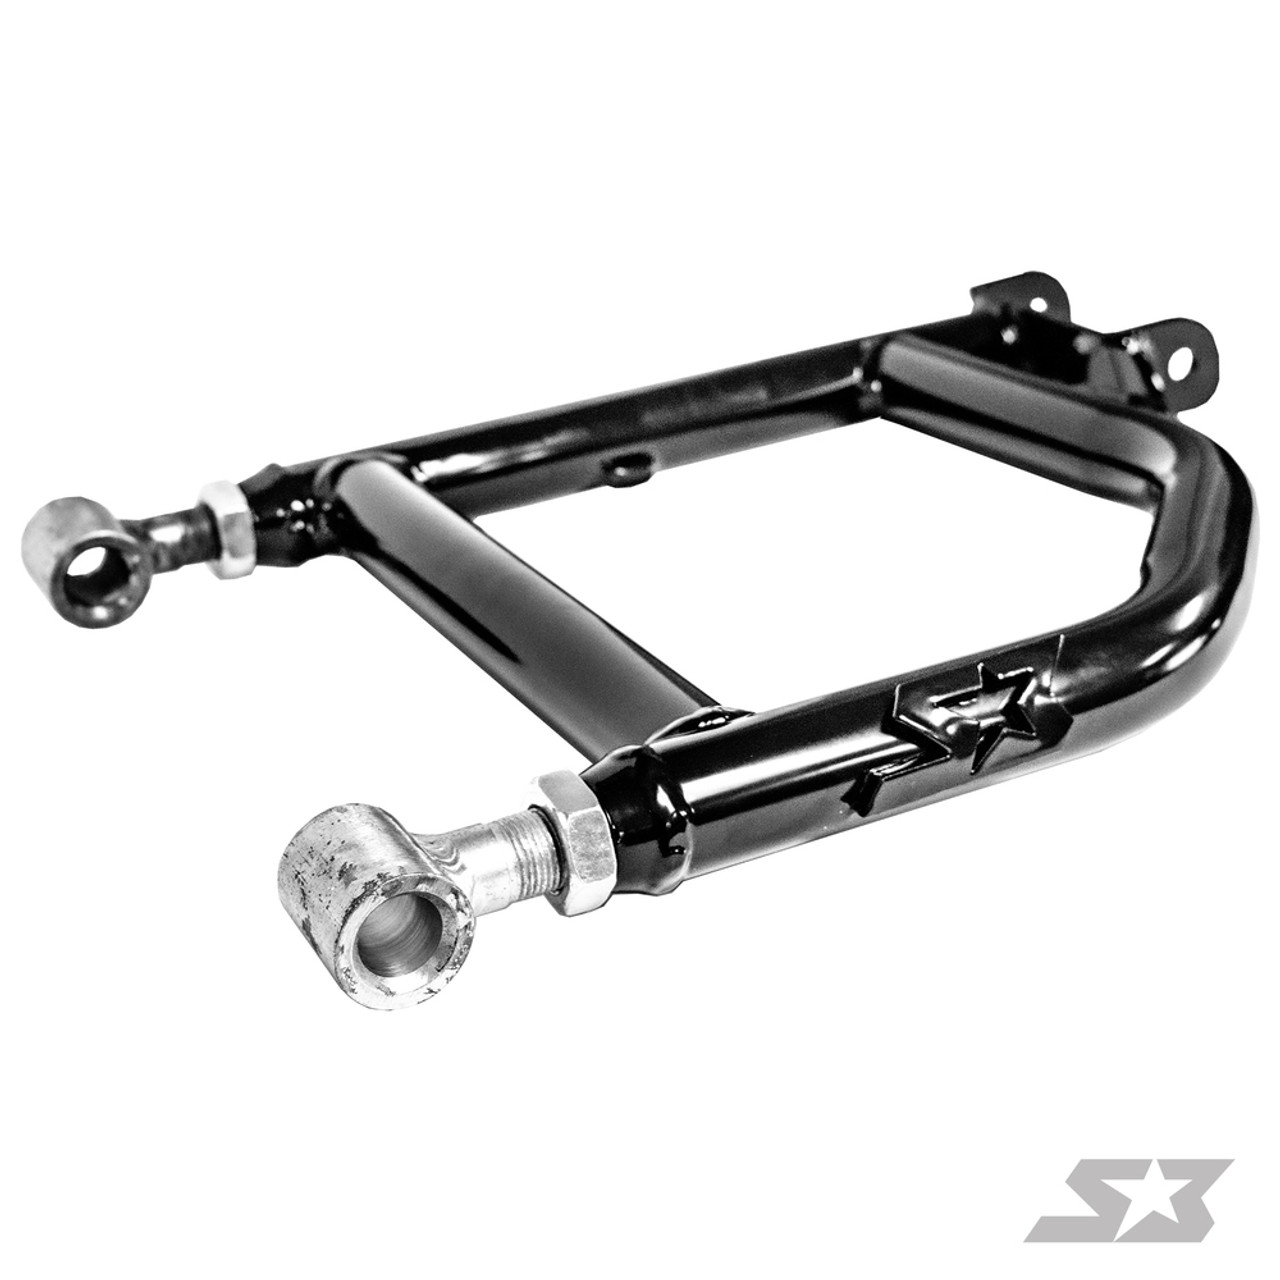 S3 Power Sports Can-Am Defender Rear Upper Adjustable A-Arms